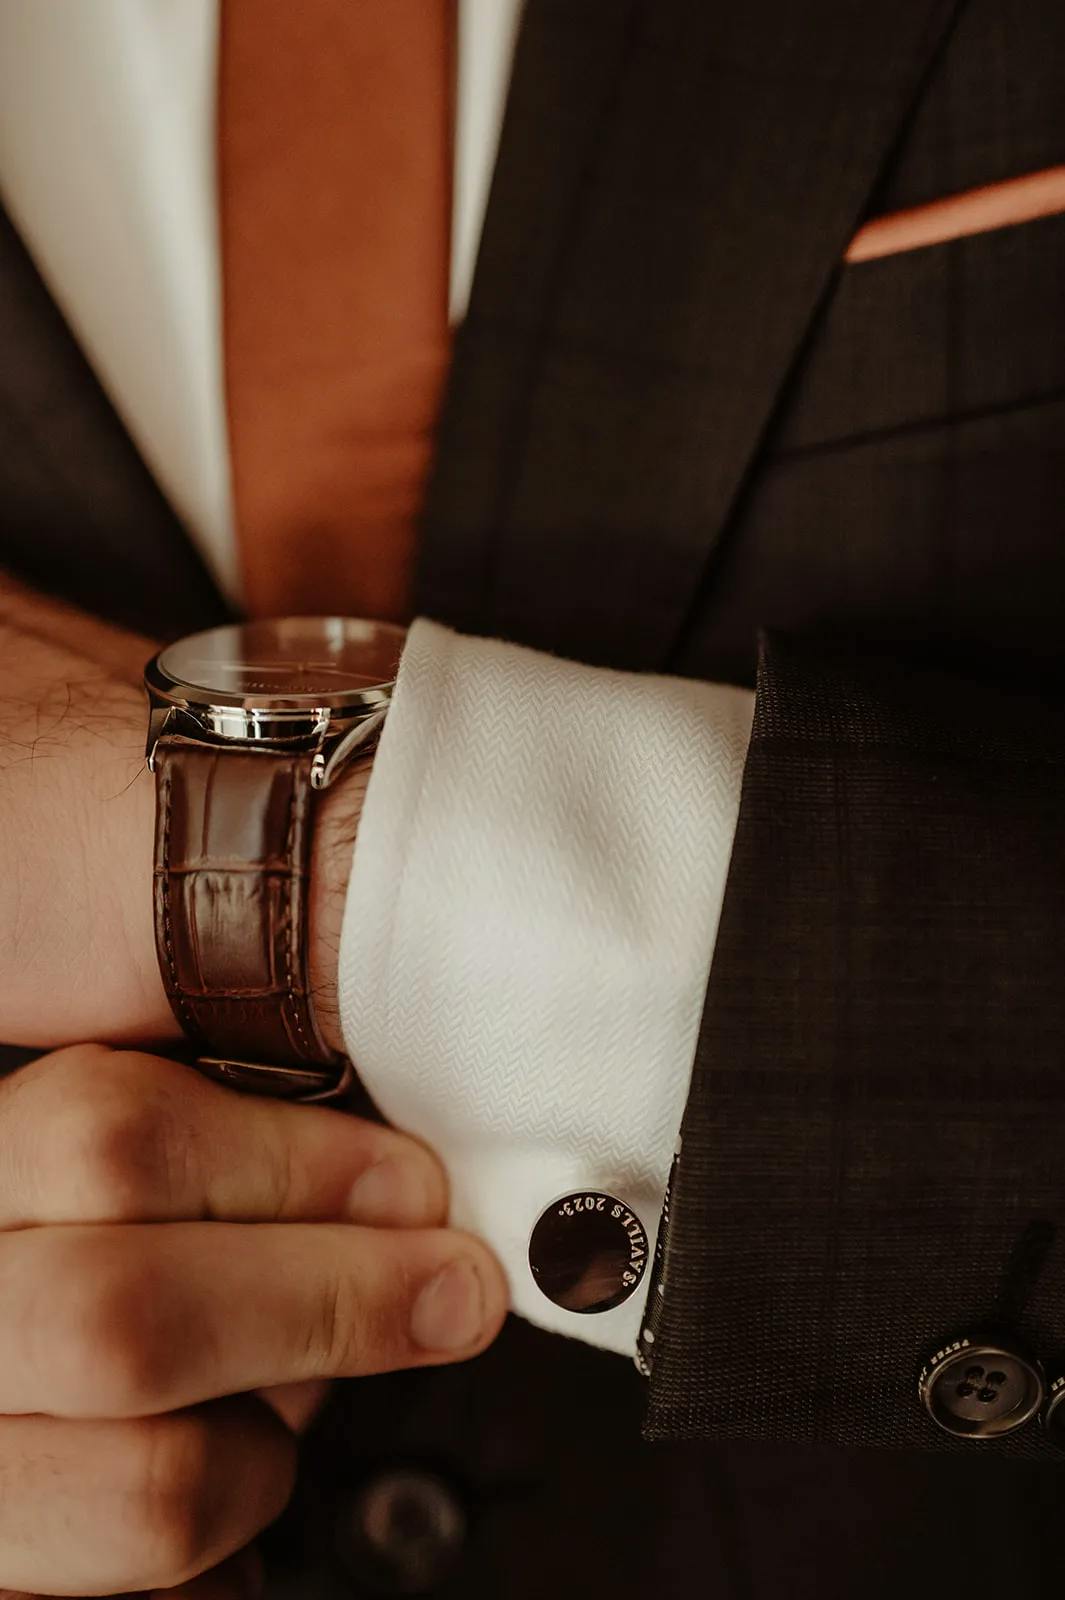 A close-up shot of a person in a dark suit with a white shirt and brown tie, adjusting their cufflinks. They are also wearing a watch with a brown leather strap and a visible silver dial.